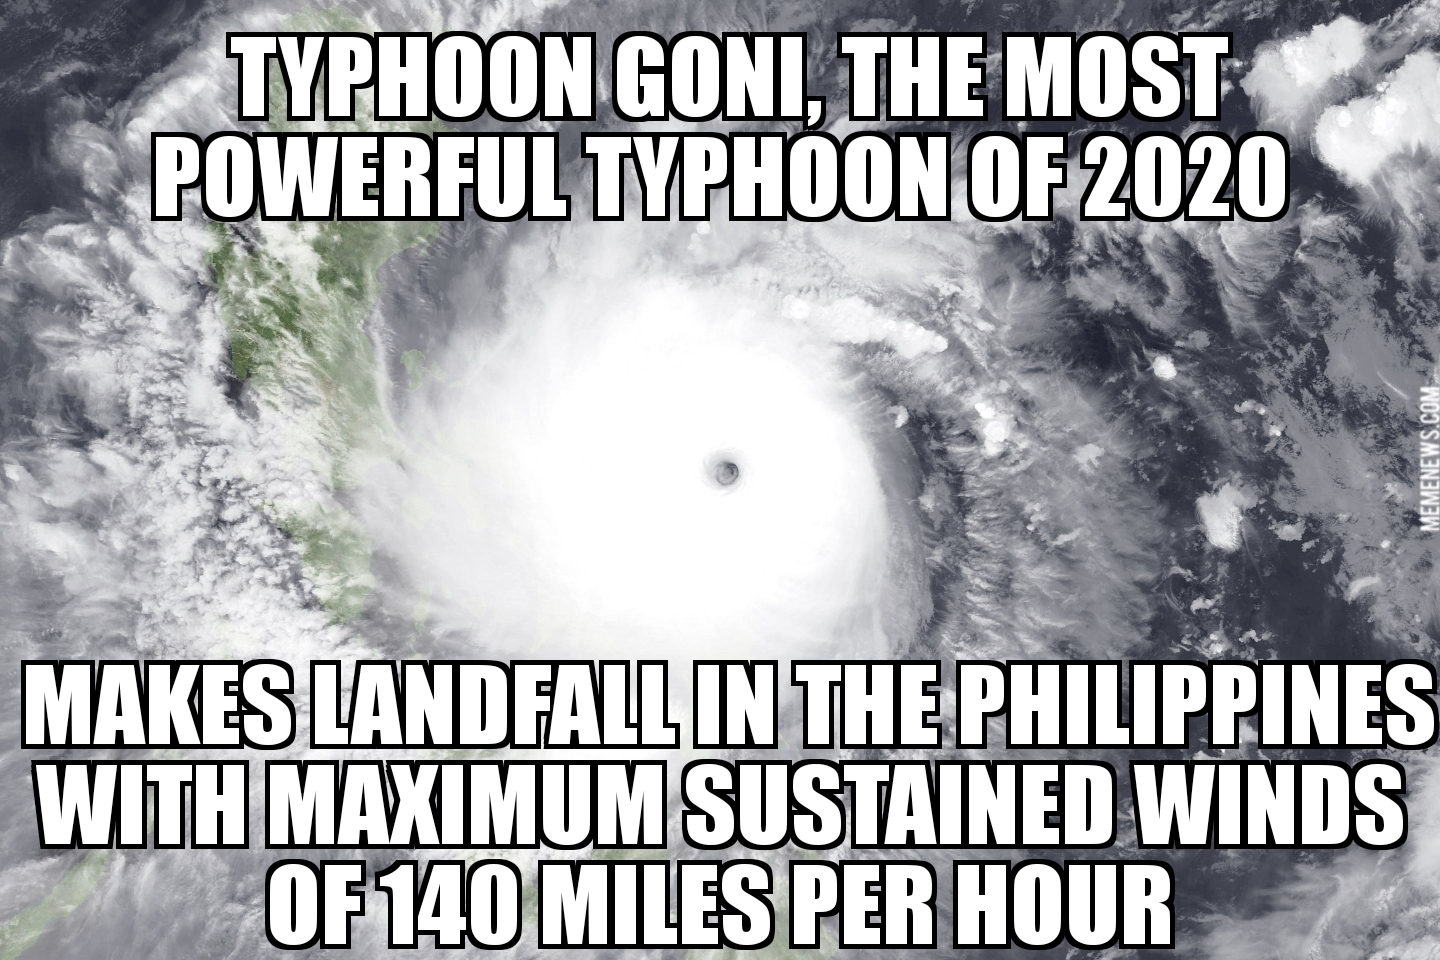 Typhoon Goni makes landfall in The Philippines